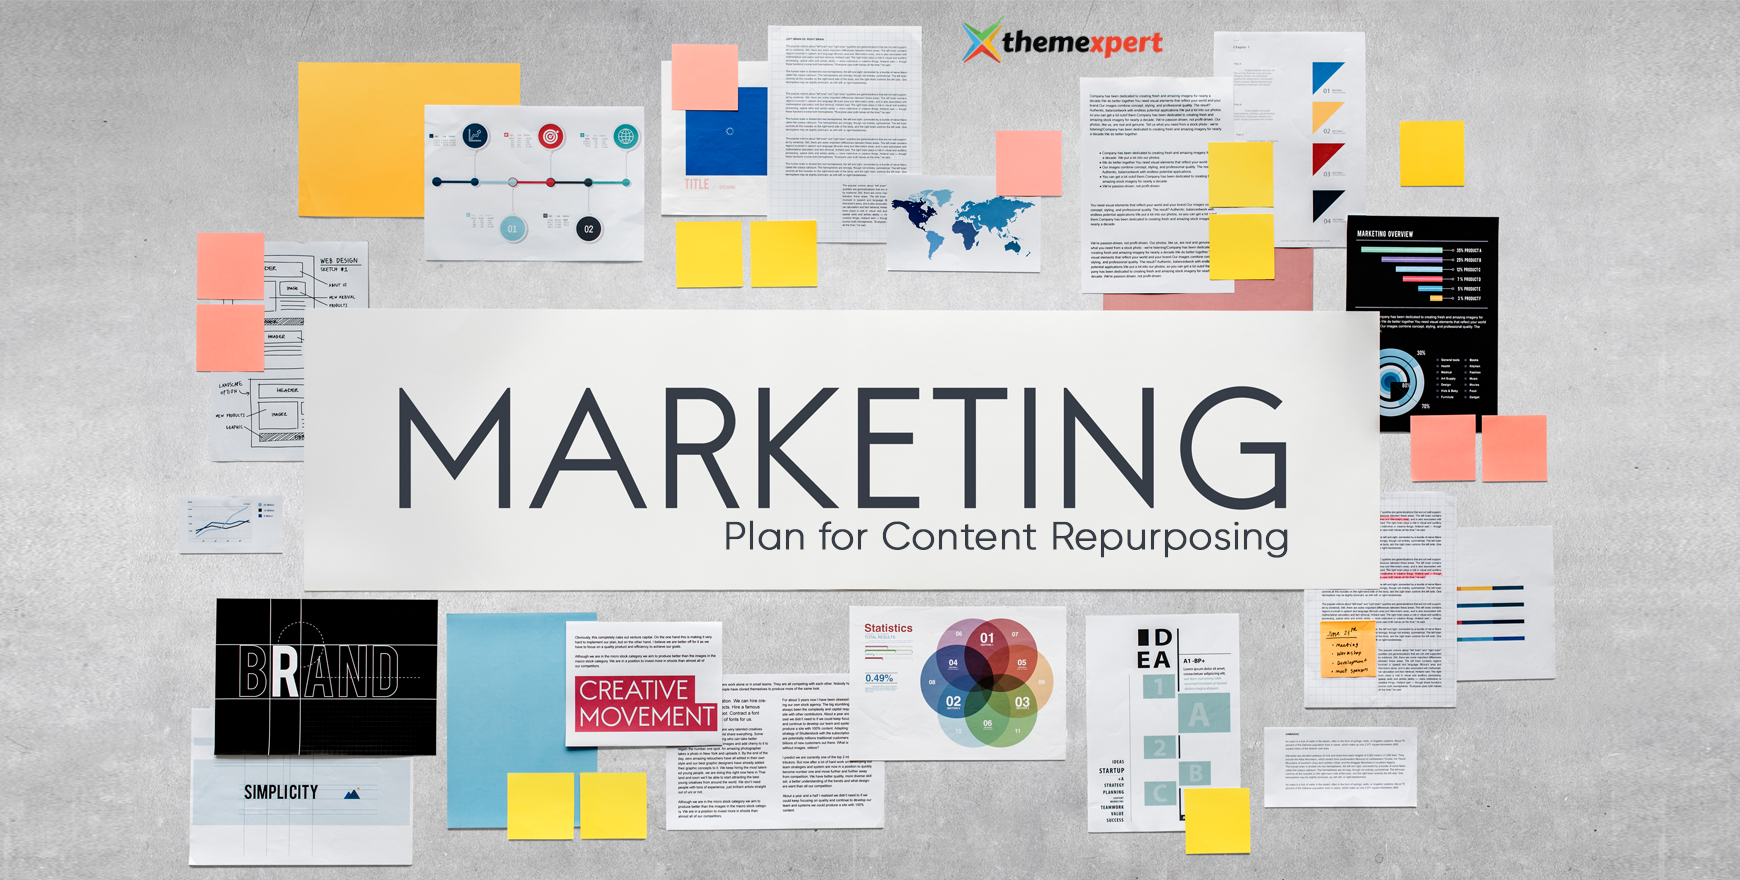 5 Tips to Introduce Content Repurposing to Your Marketing Plan